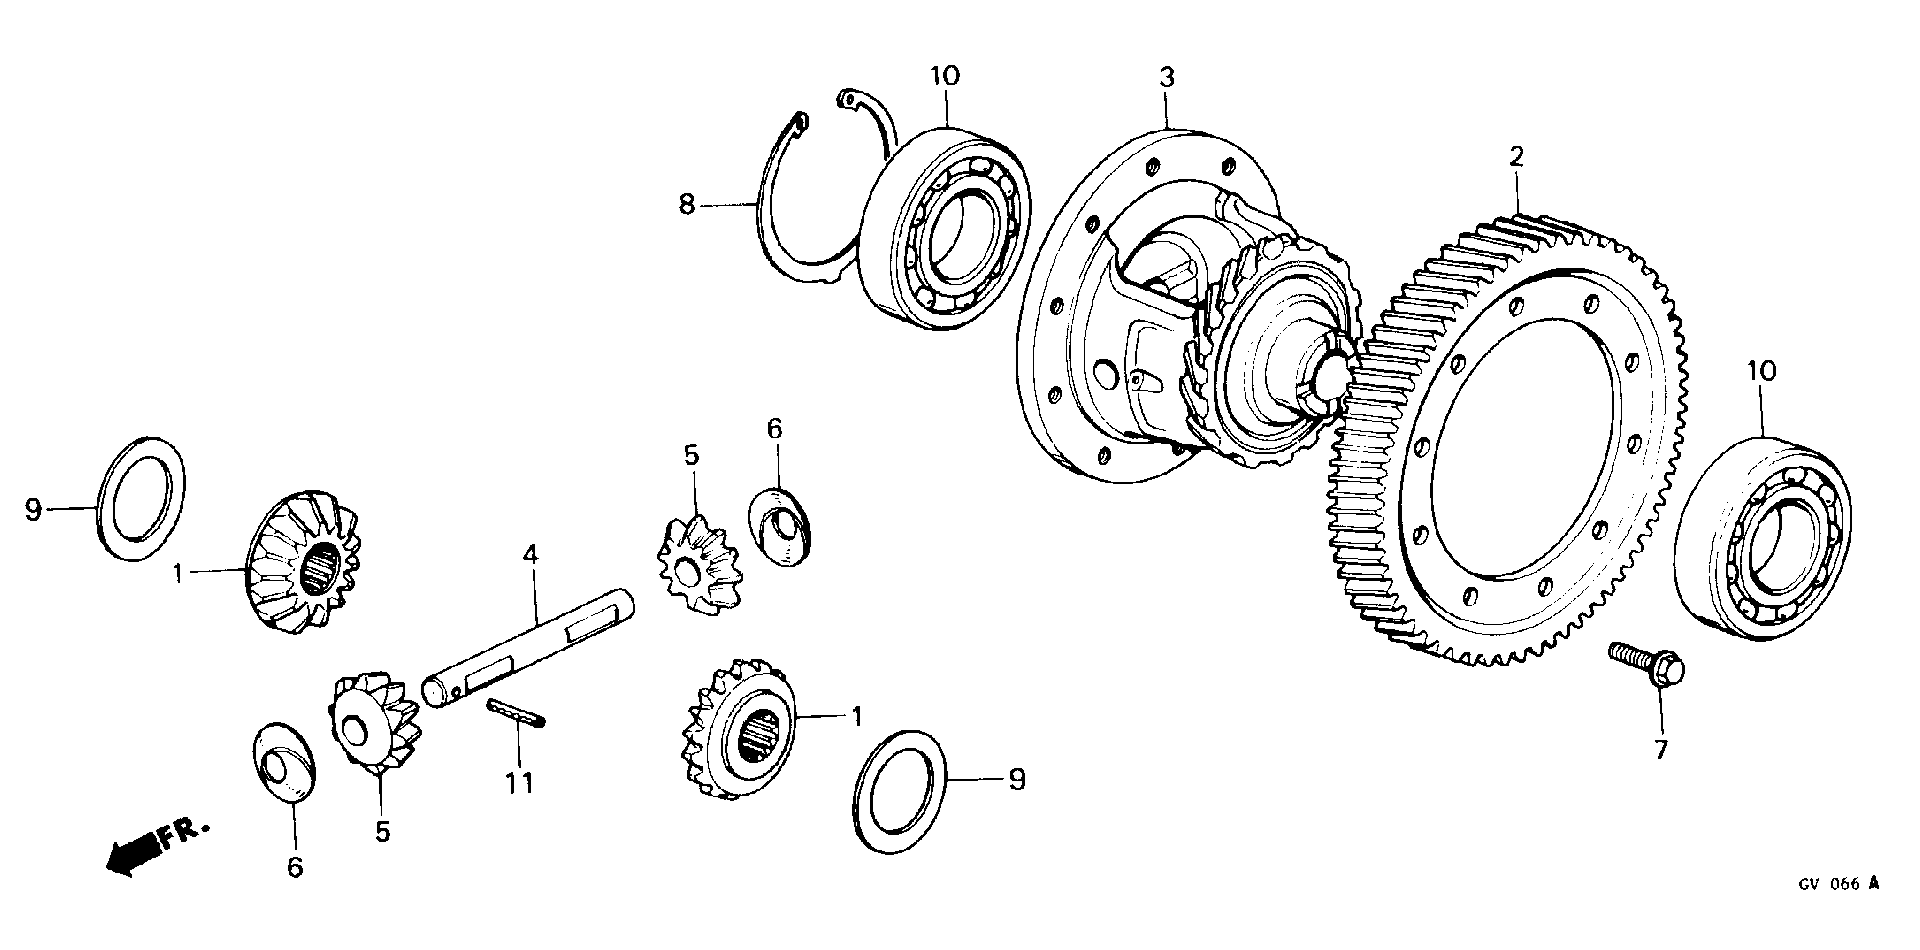 DIFFERENTIAL(1600)